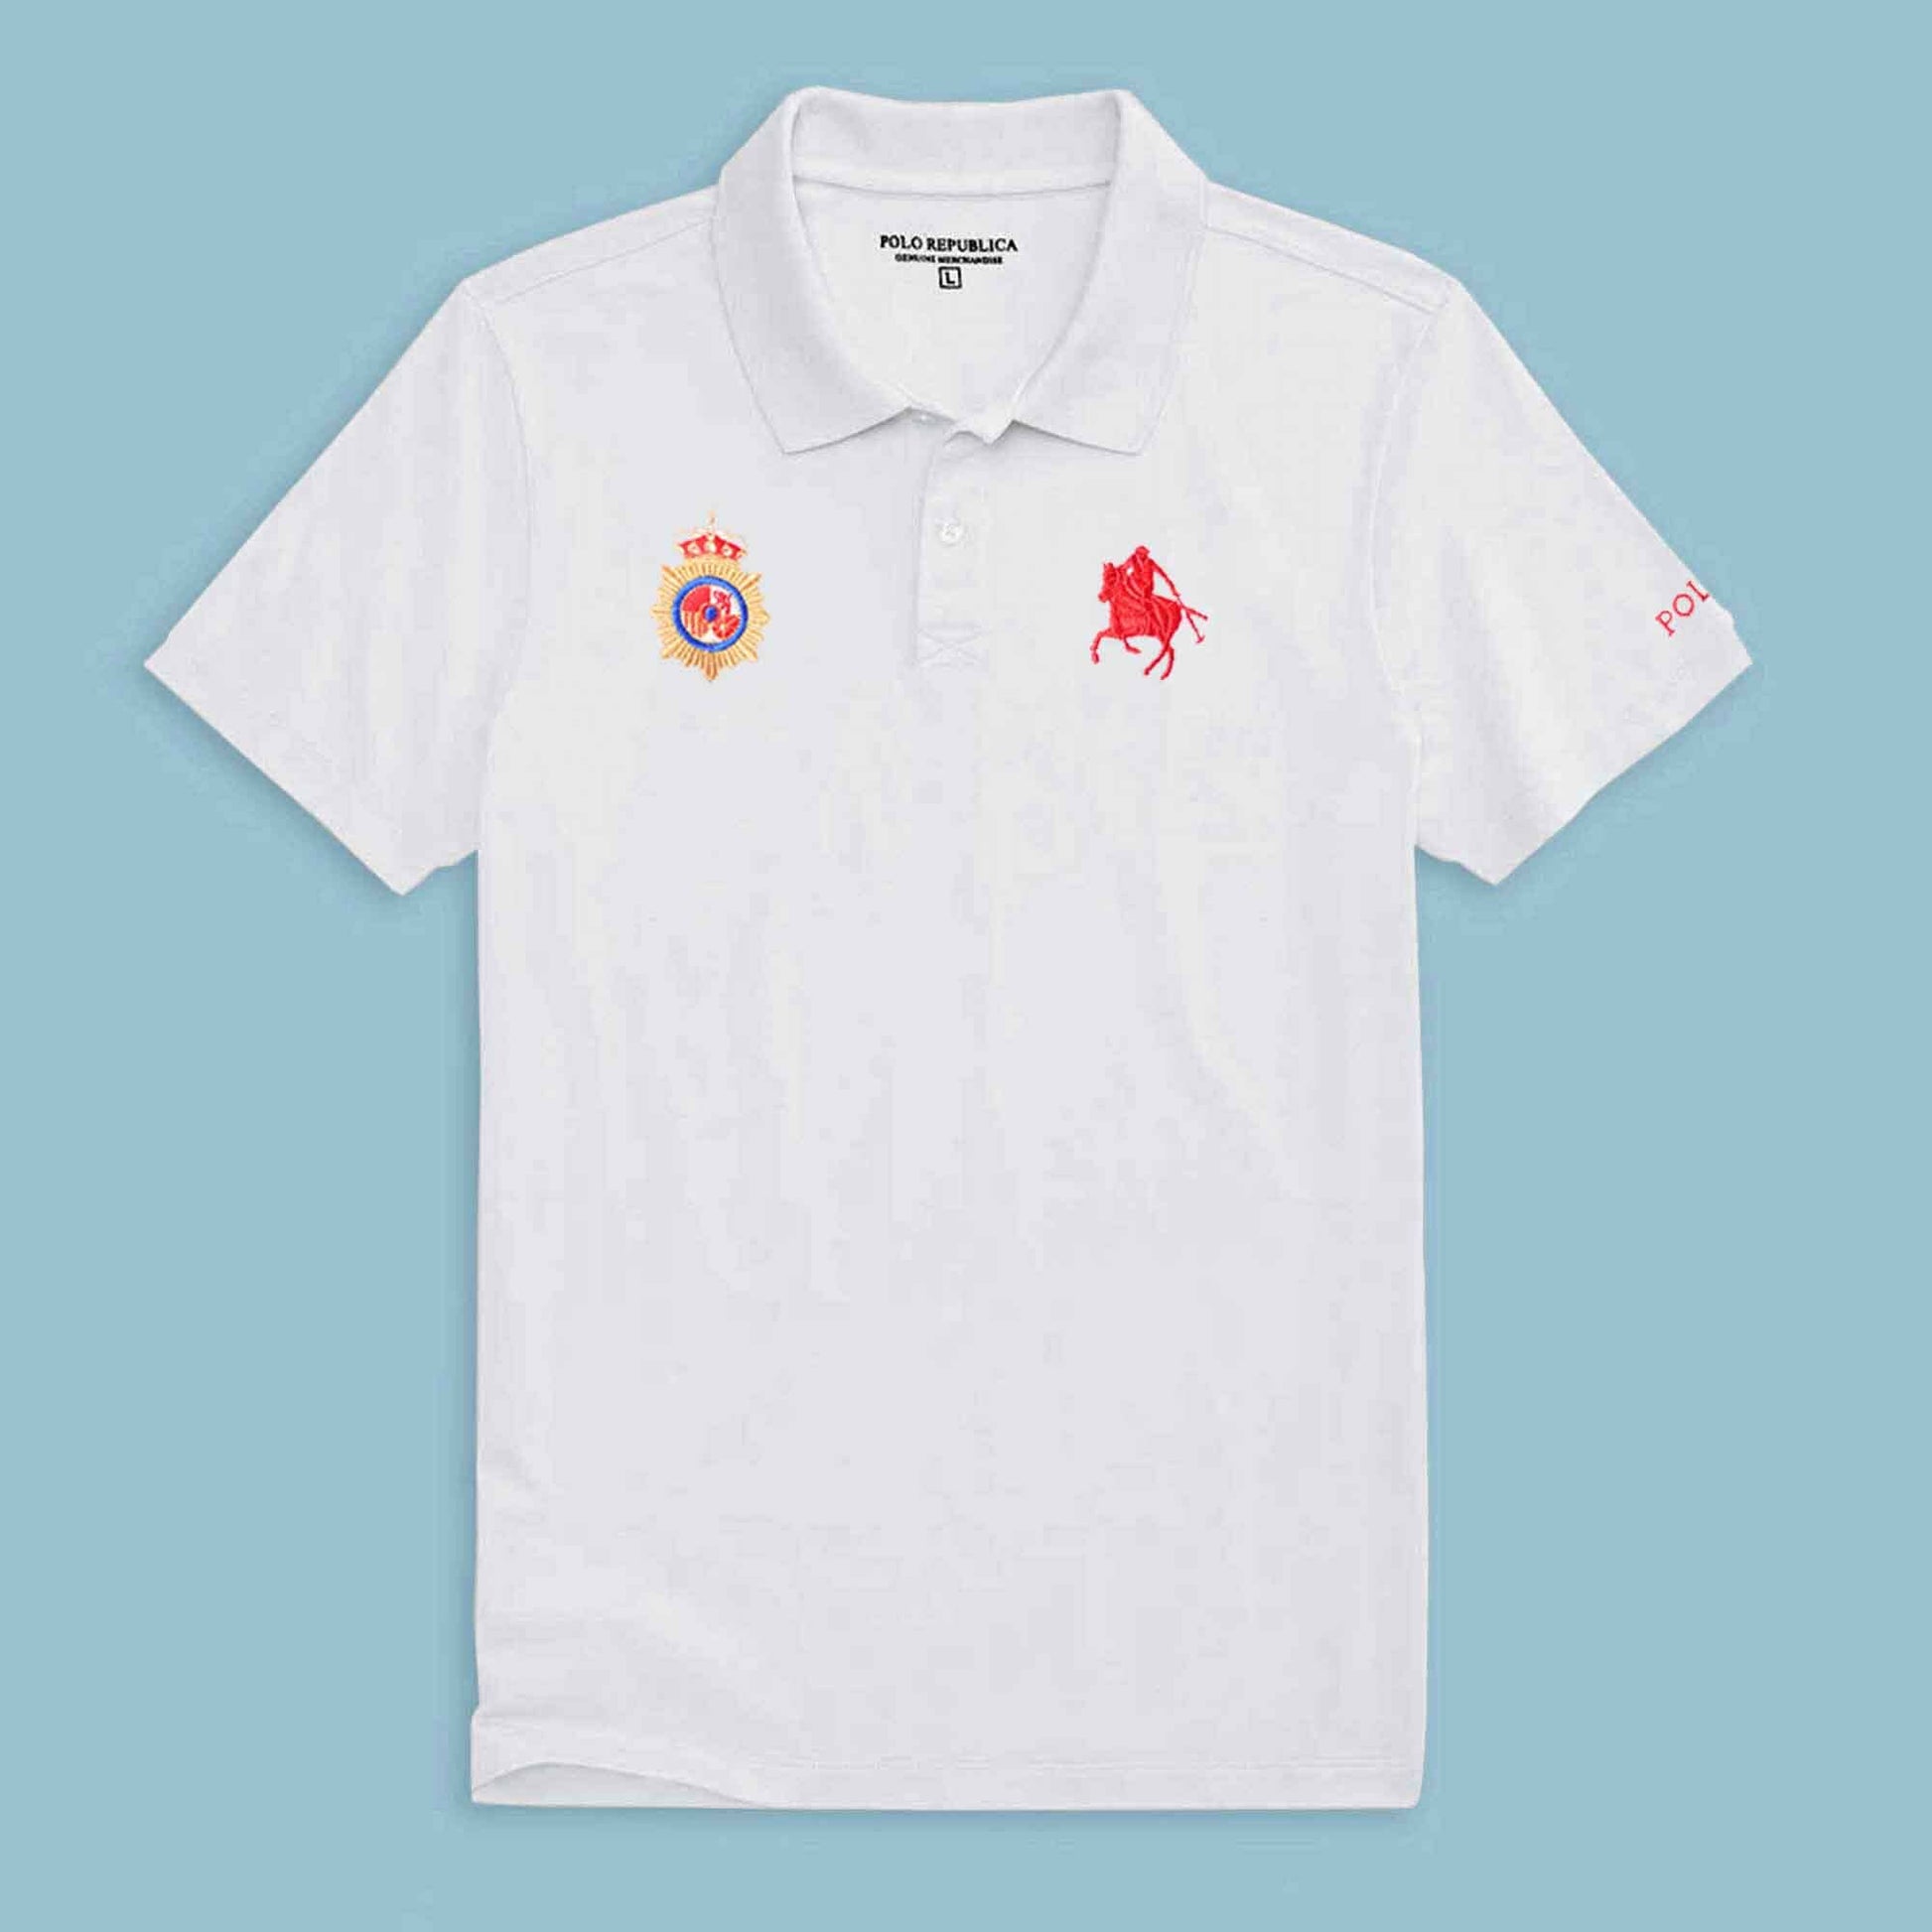 Polo Republica Men's Horse Rider & Crown Crest Embroidered Short Sleeve Polo Shirt